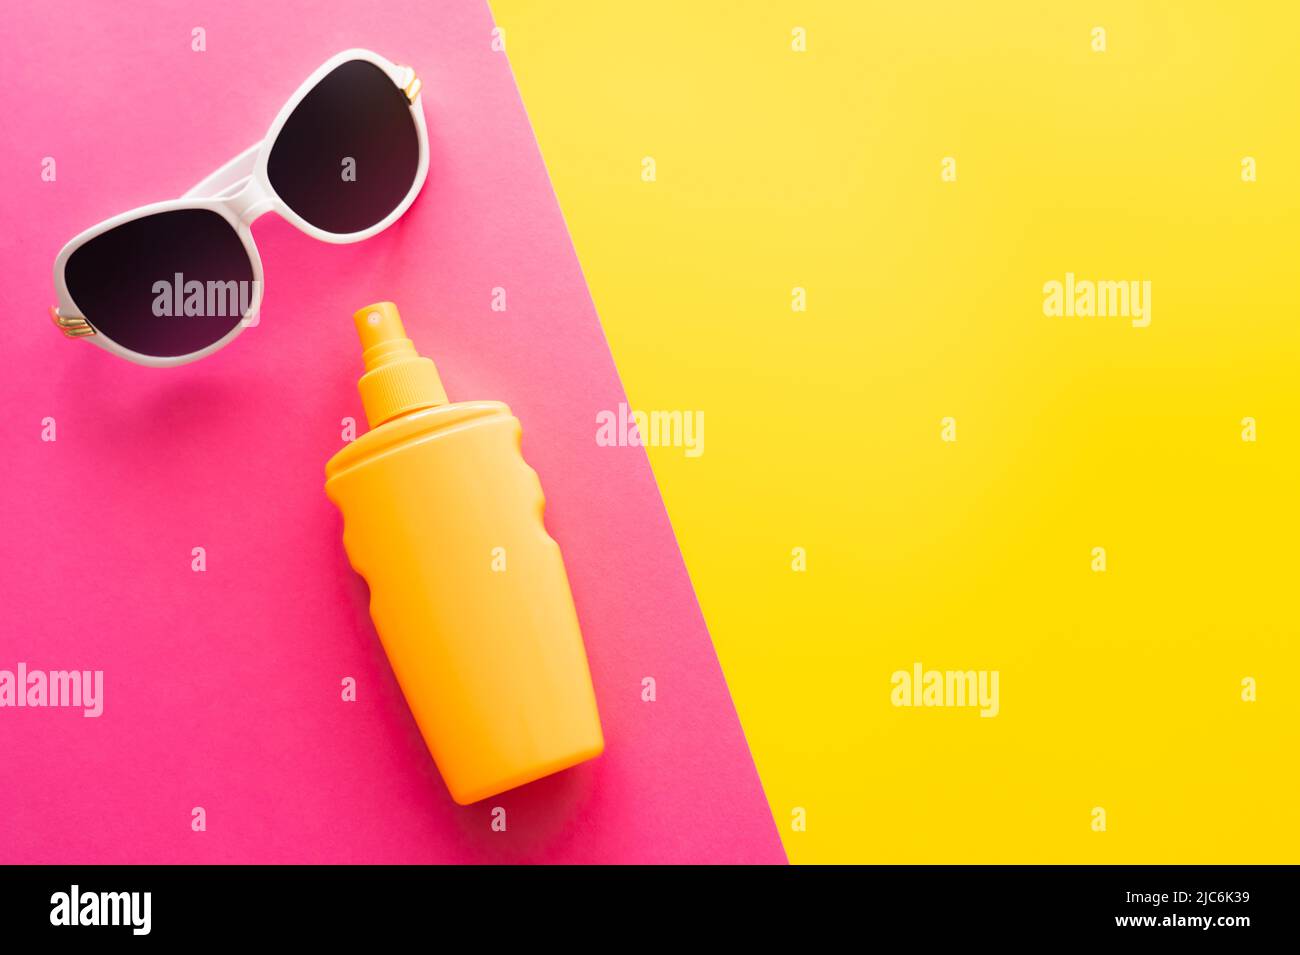 Top view of sunglasses and sunblock on pink and yellow background Stock Photo